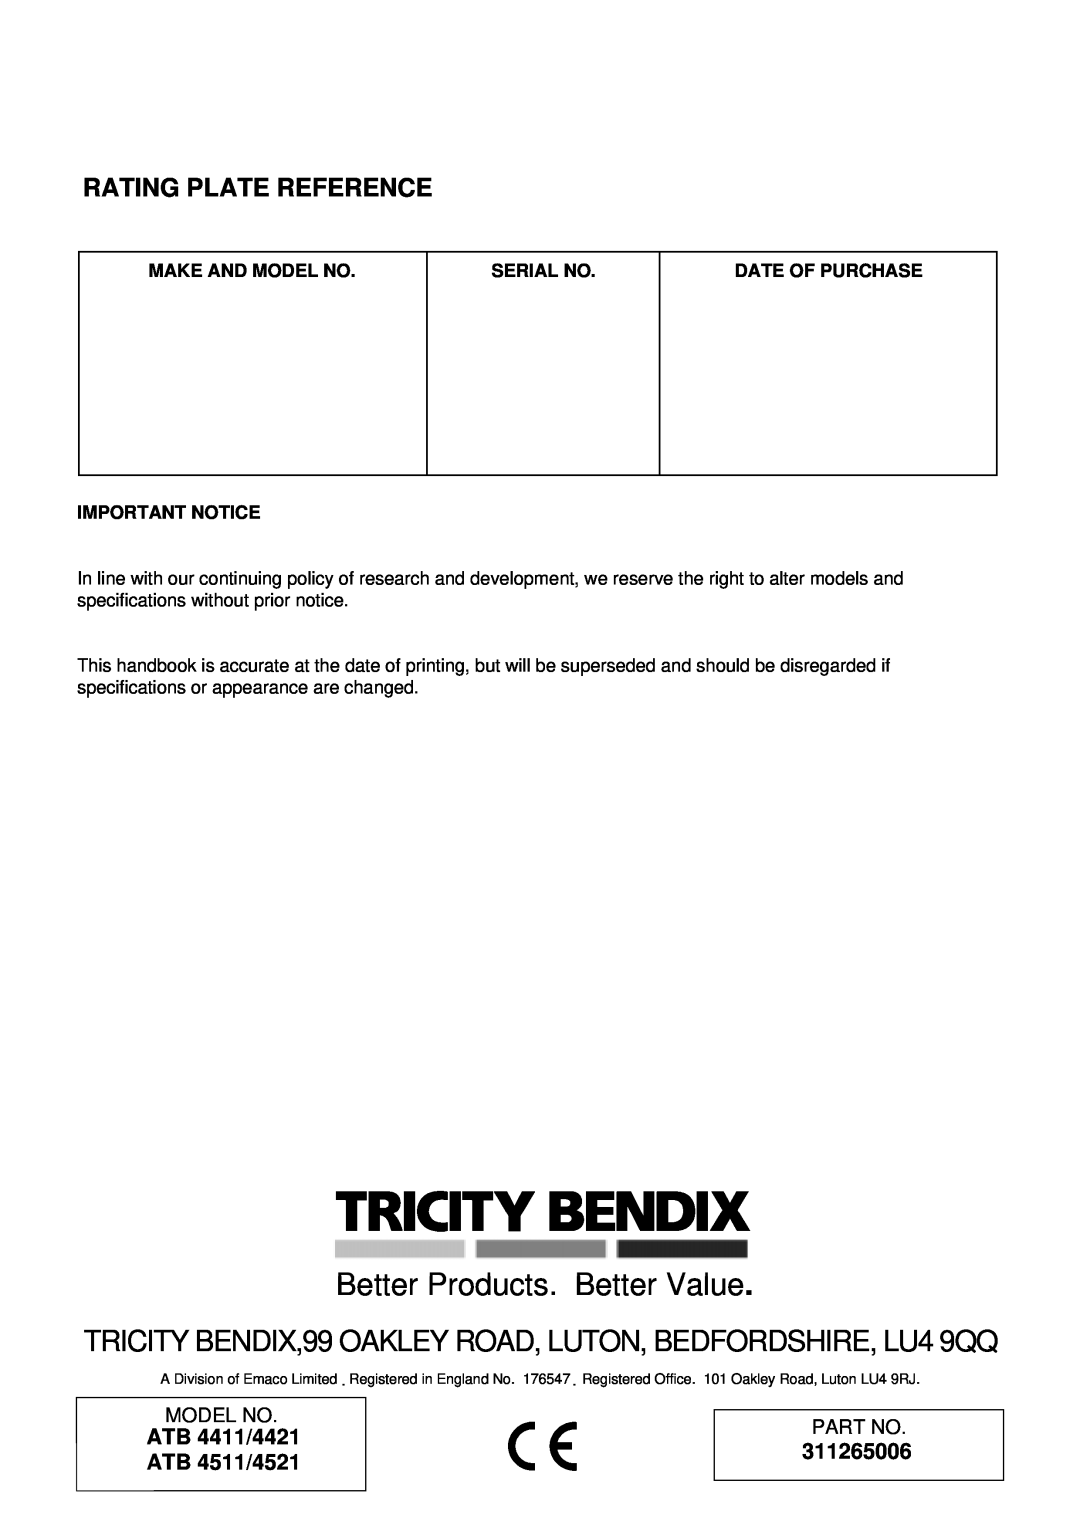 Tricity Bendix DEVON, DORSET Rating Plate Reference, ATB 4411/4421 ATB 4511/4521, 311265006, Better Products. Better Value 